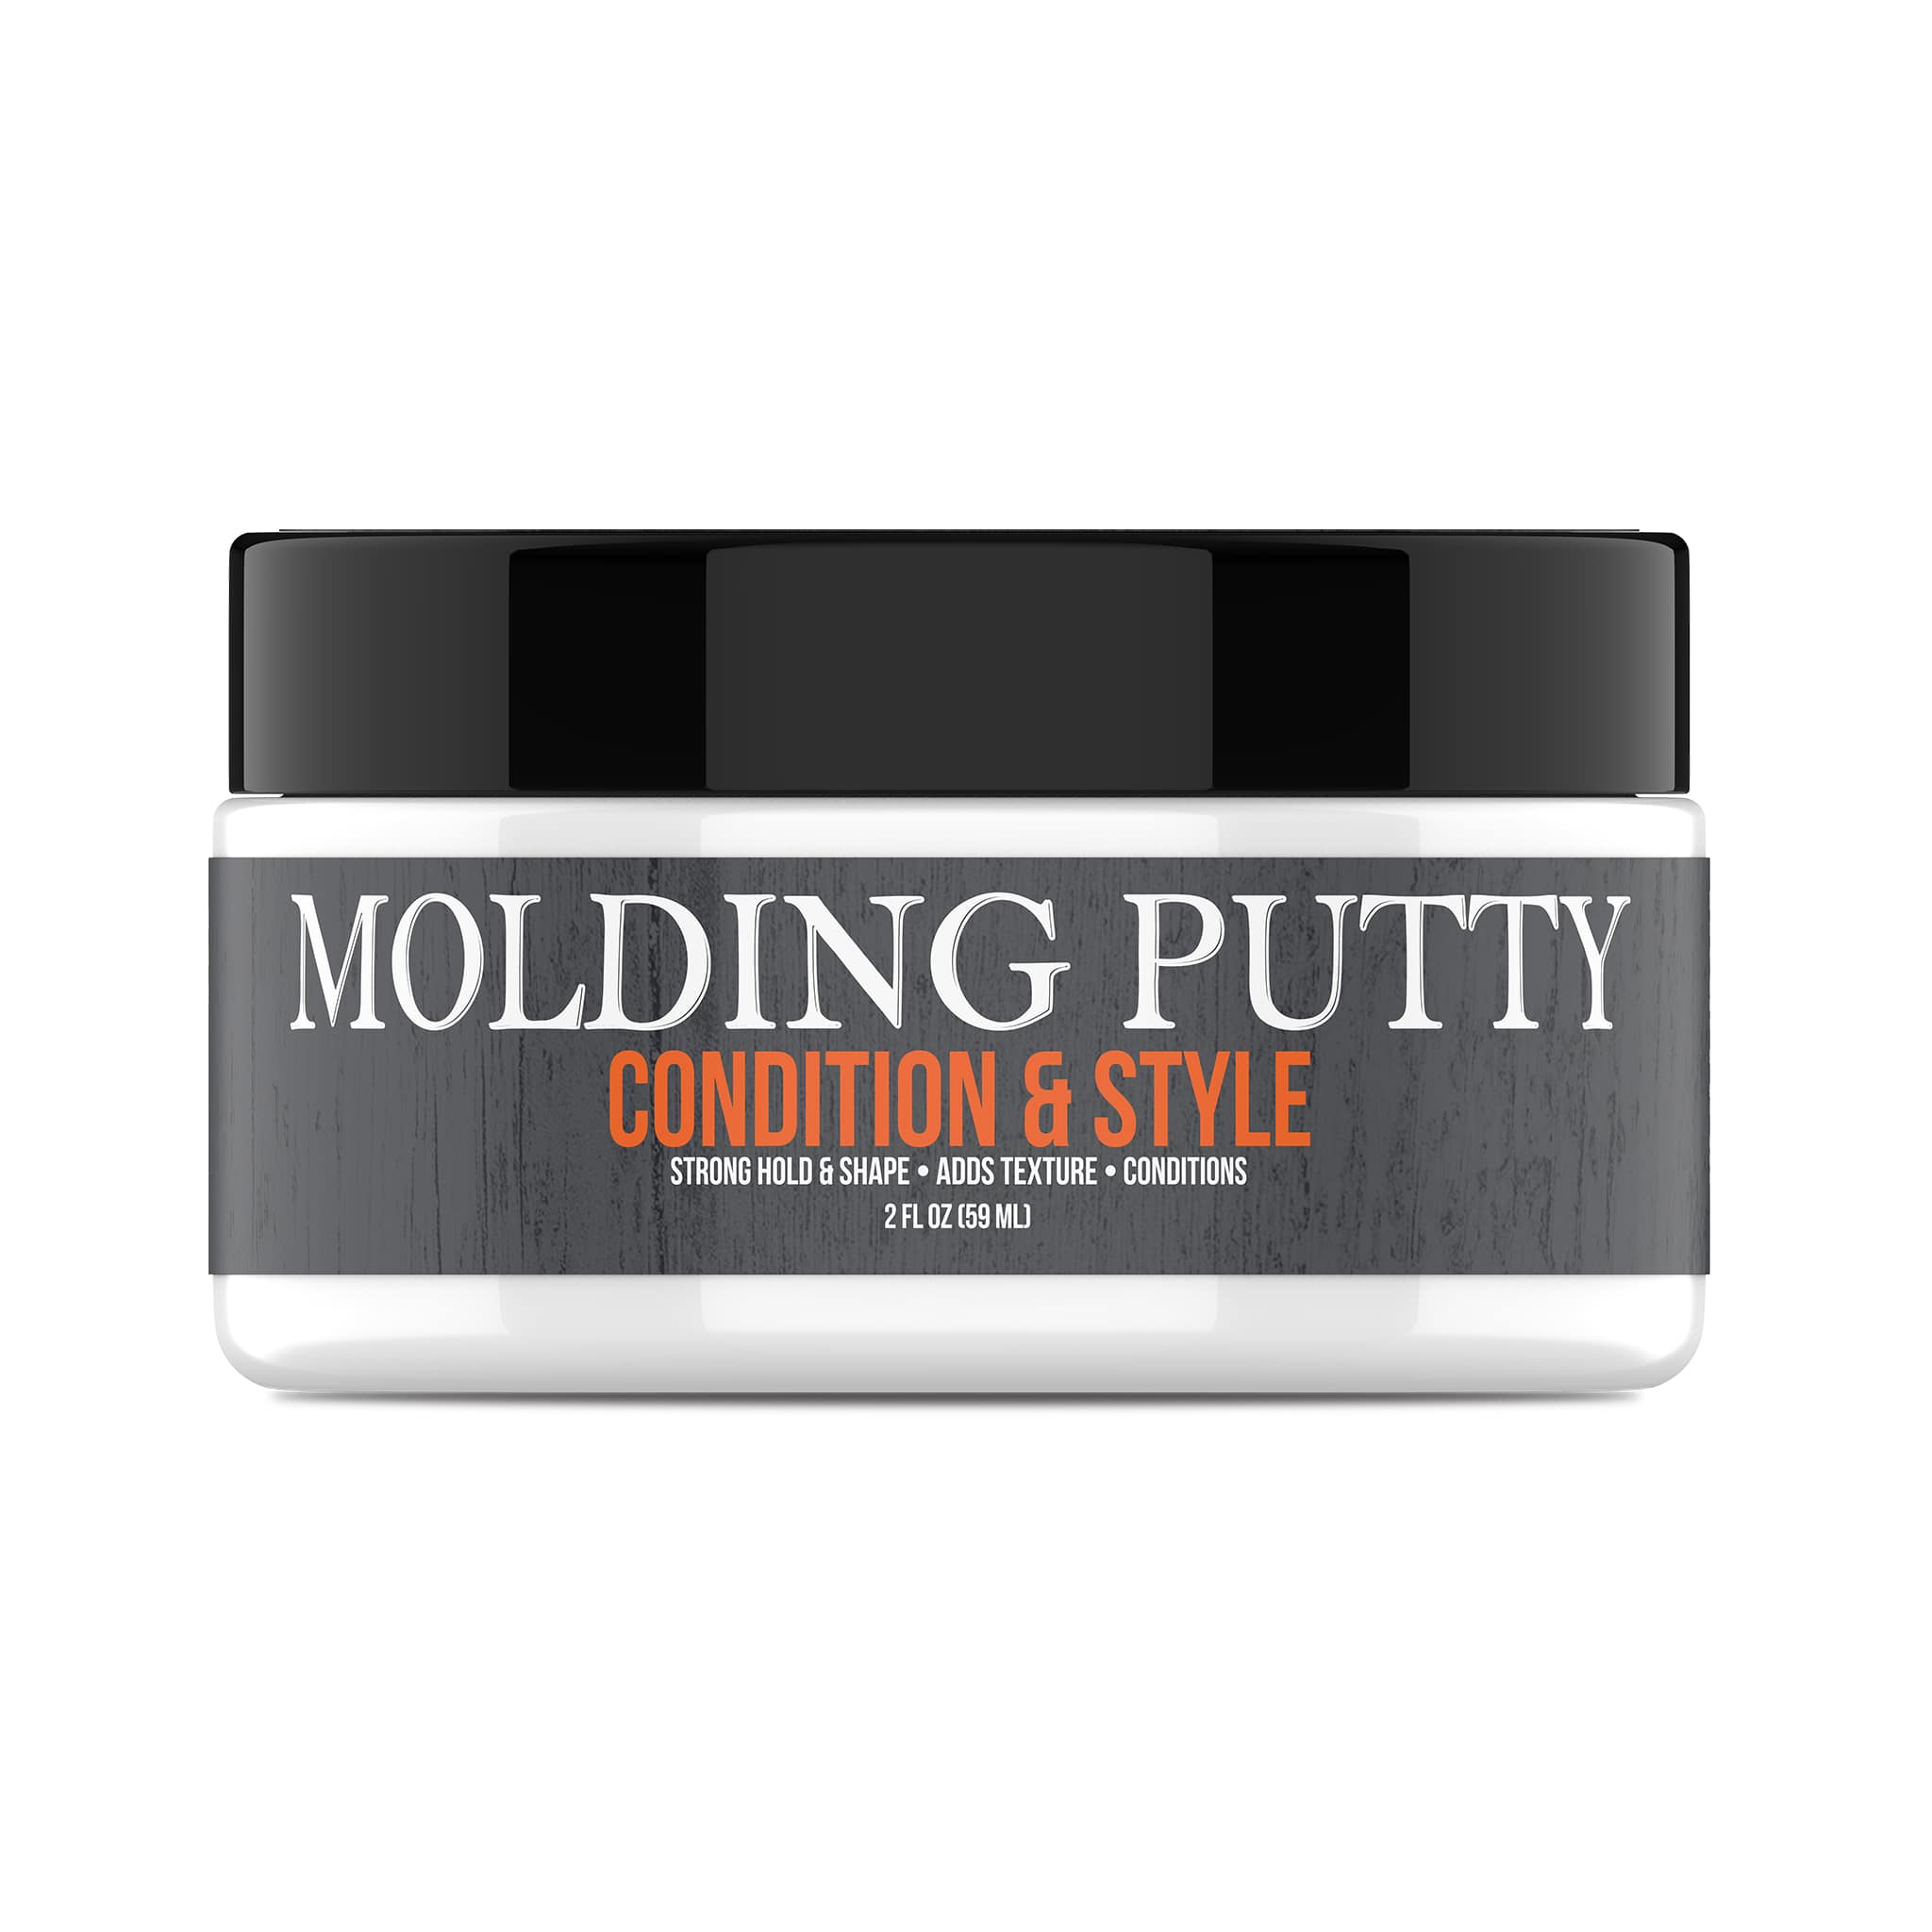 Try our Molding Putty to provide strong hold